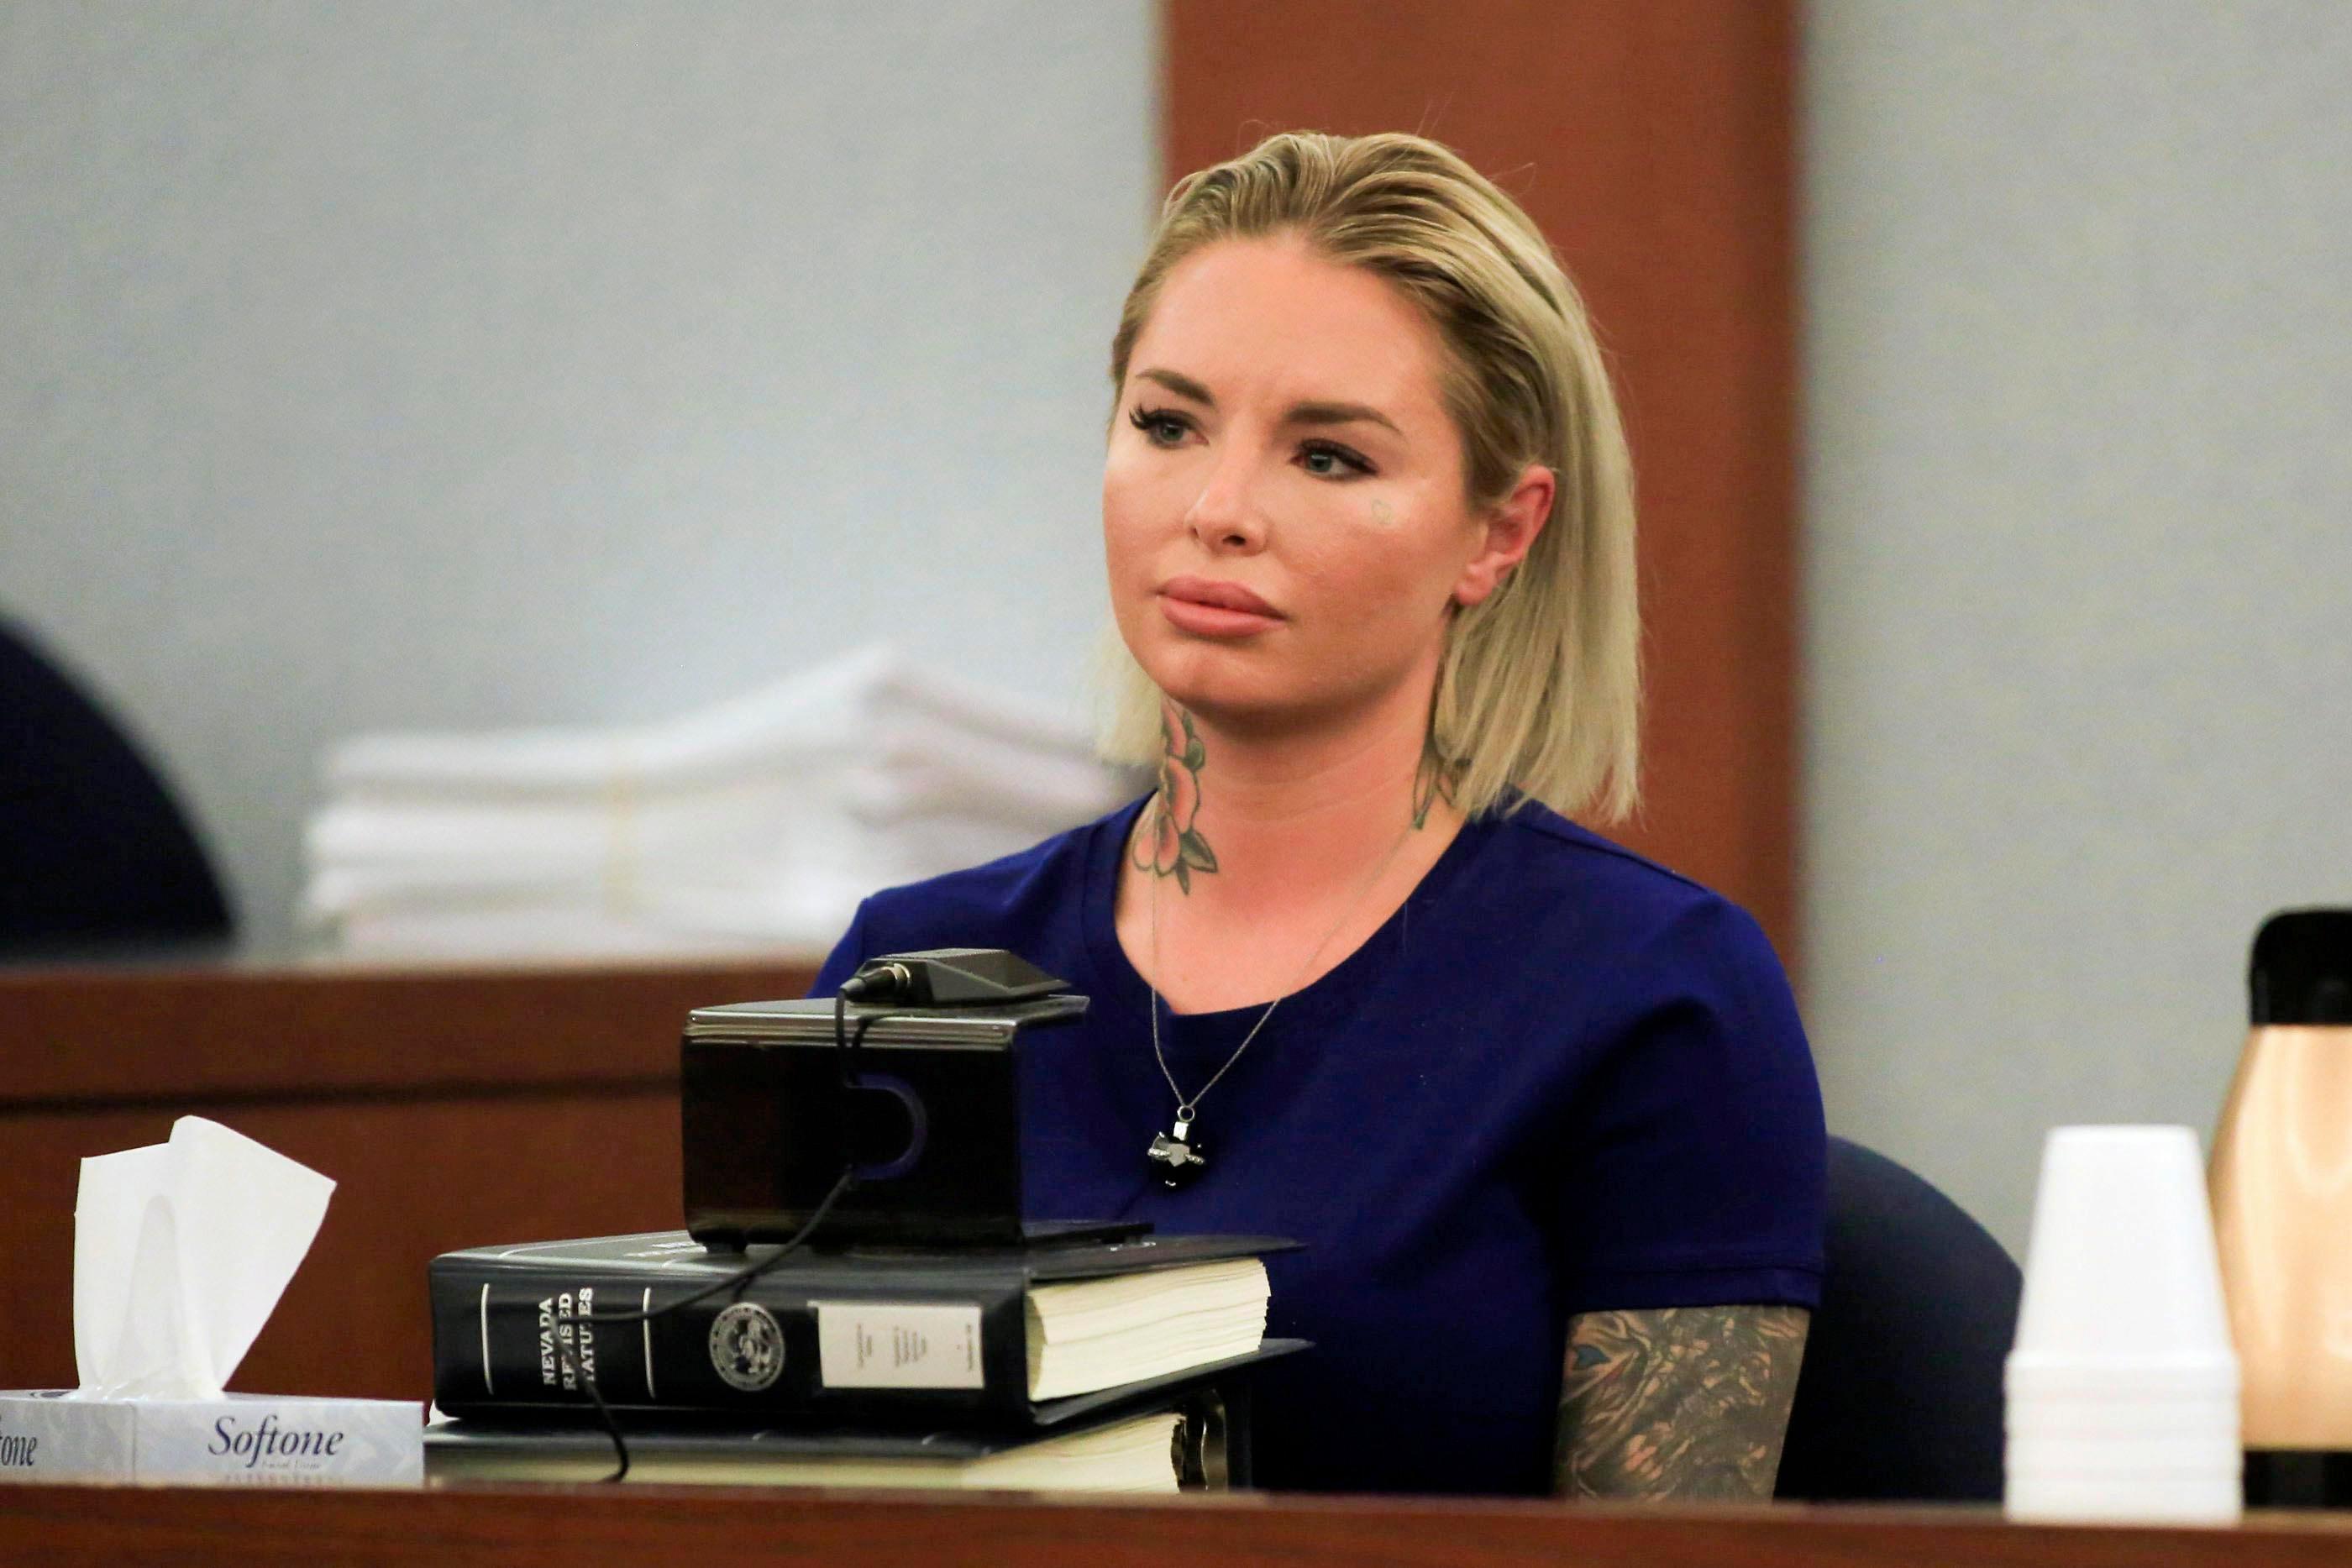 Christy Mack Told The Court She Sent Her Ex A Topless Pic Of Herself Before